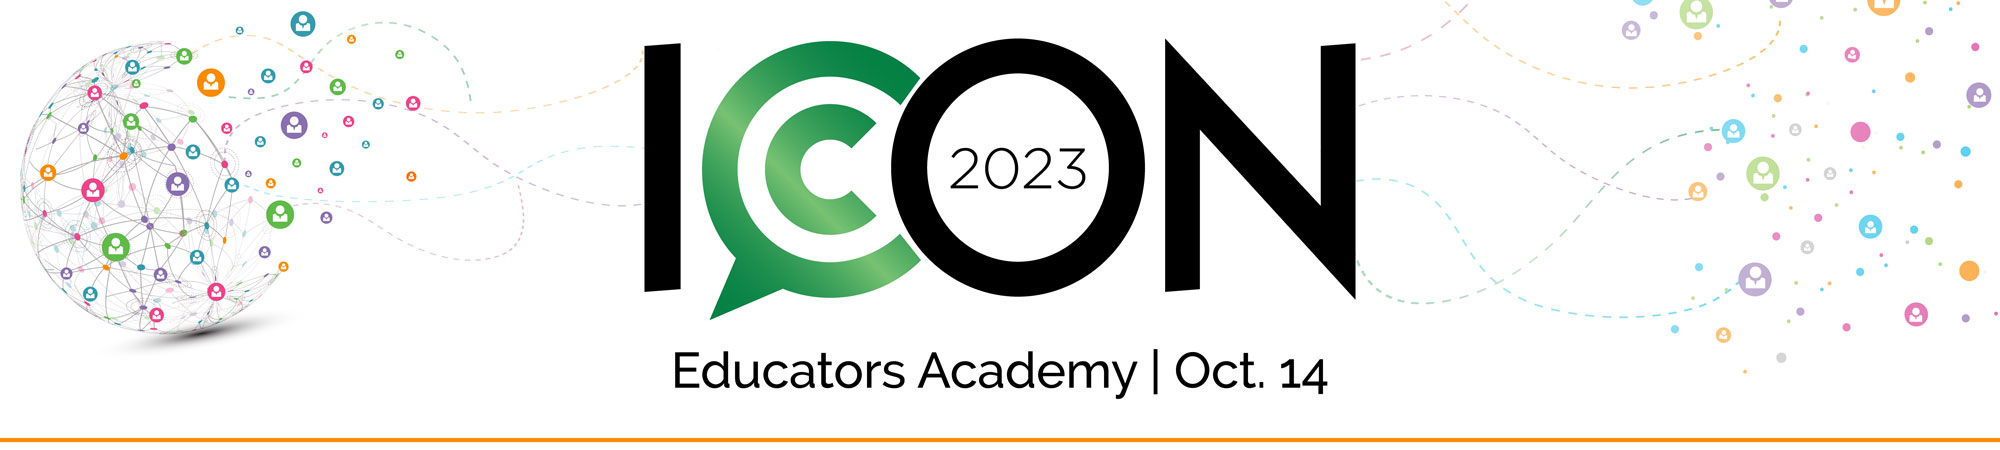 Educators Academy at ICON 2023 Conference